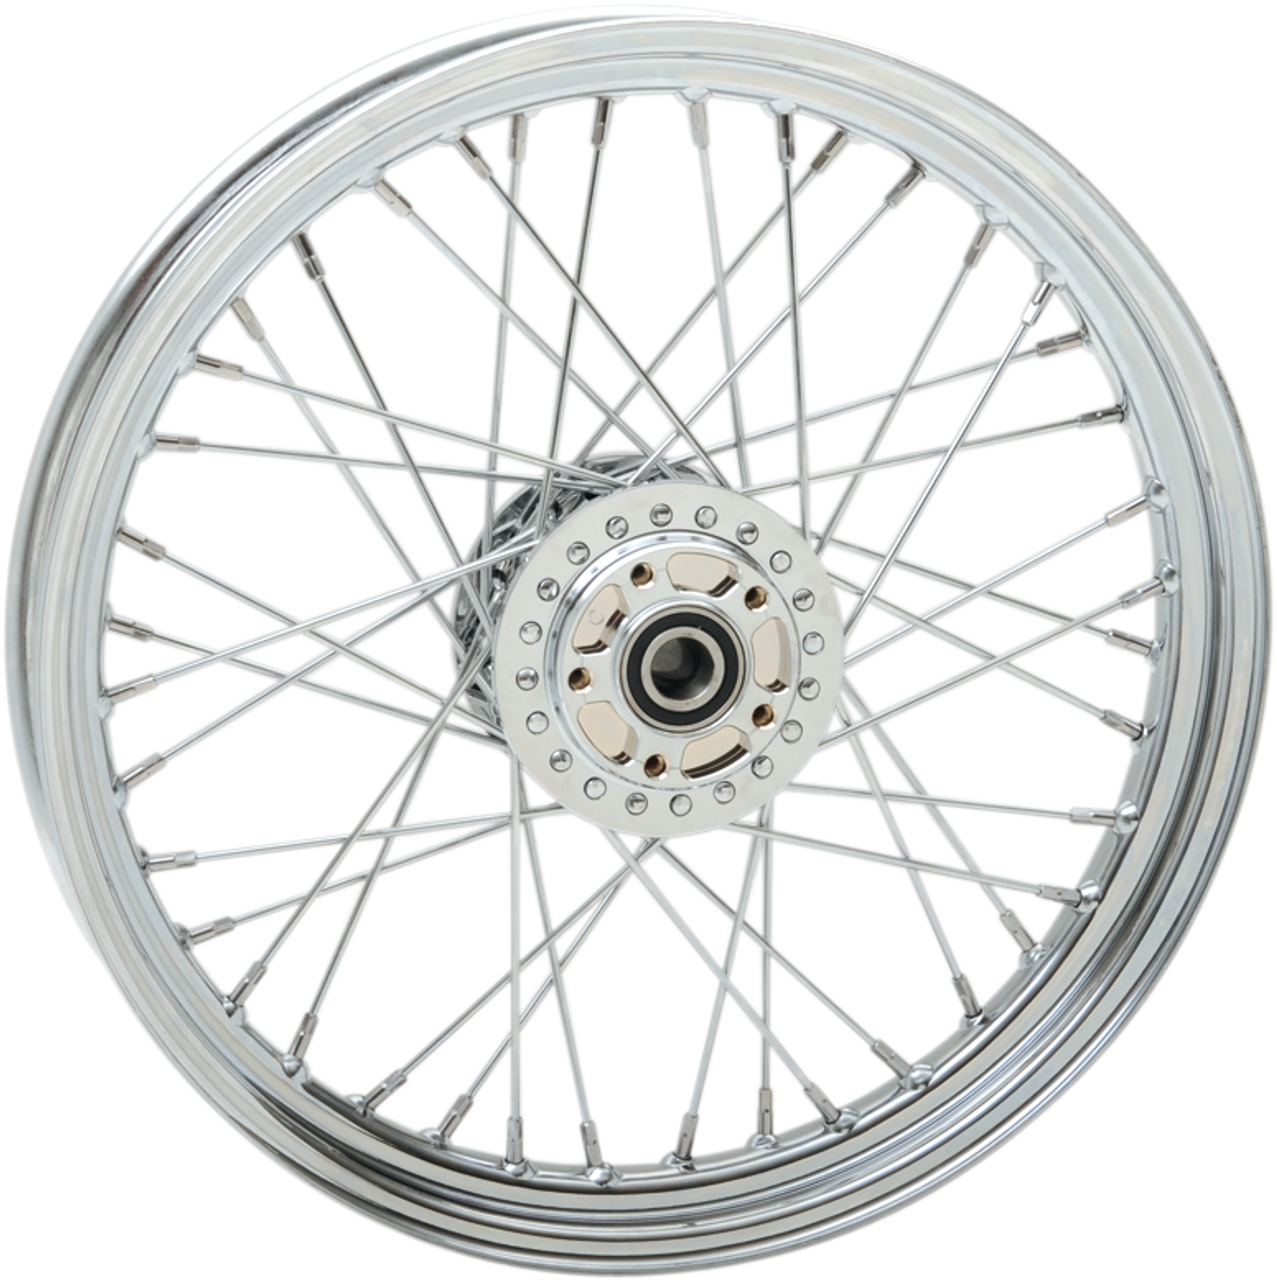 Drag Specialties #63148 - Wheel - Laced - 40 Spoke - Front - Chrome - 19x2.5 - '04-'05 FXD